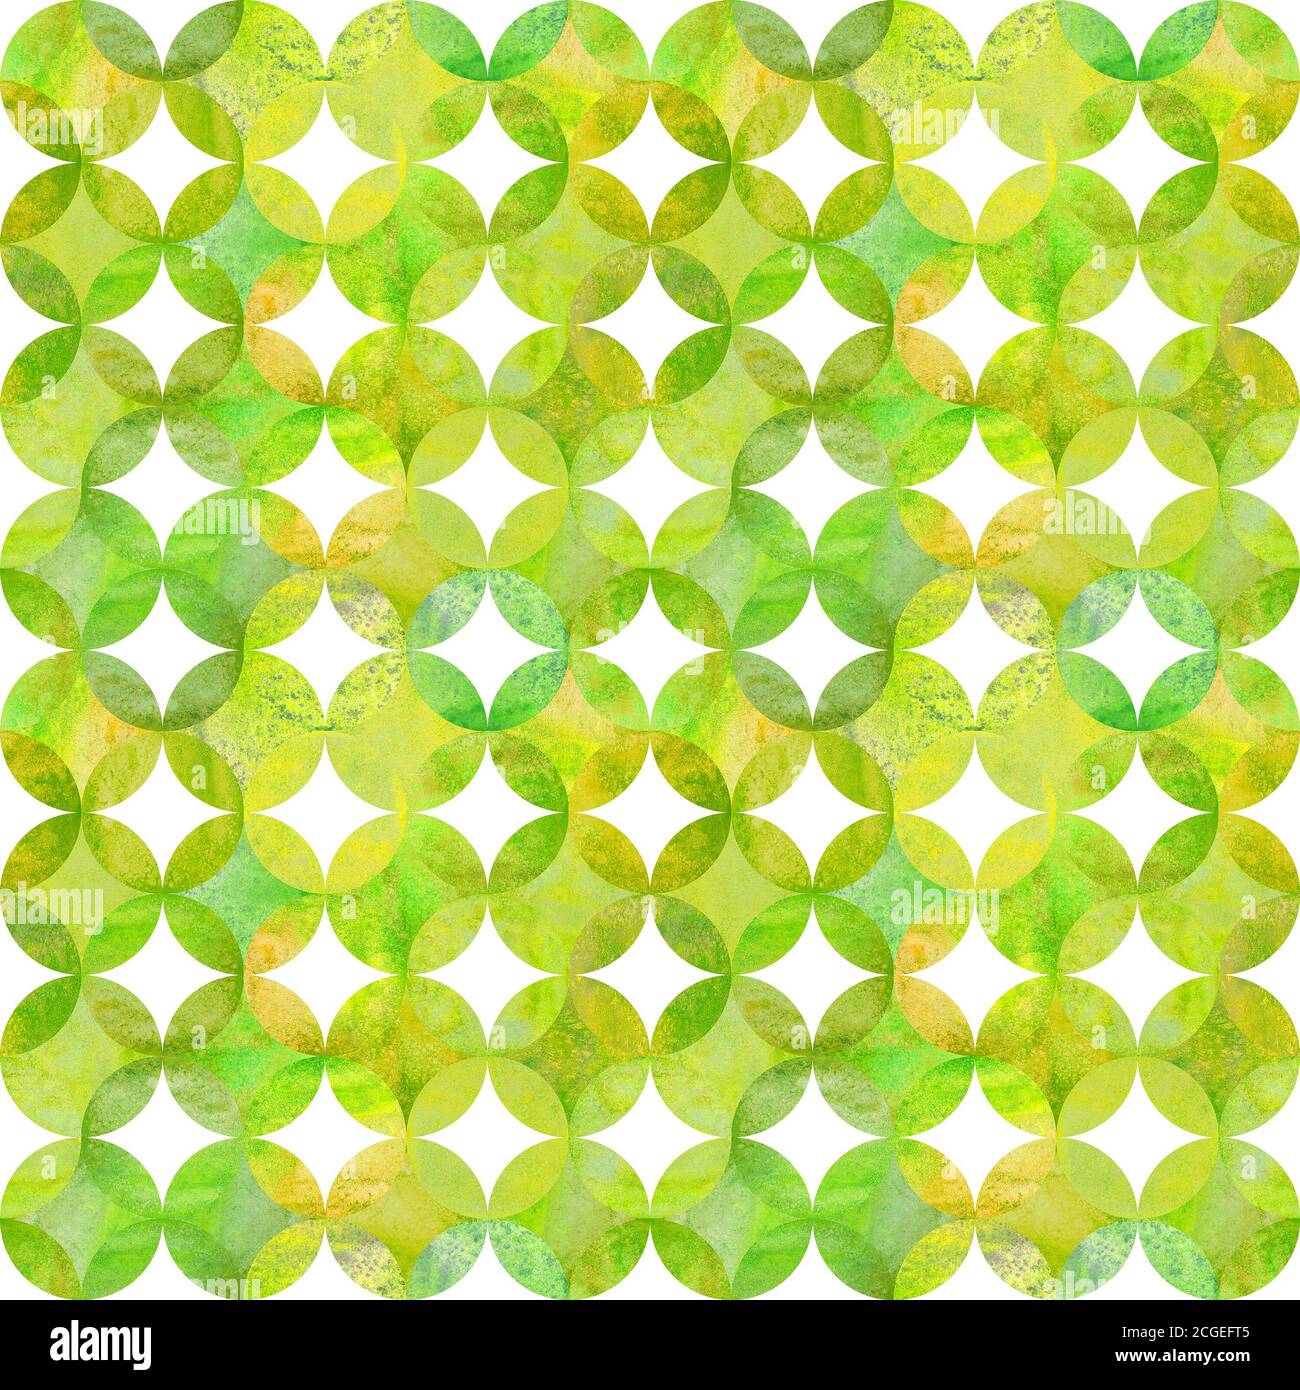 Abstract watercolor background with colorful overlapping circles on white. Watercolor hand drawn yellow green seamless pattern. Watercolour round shap Stock Photo